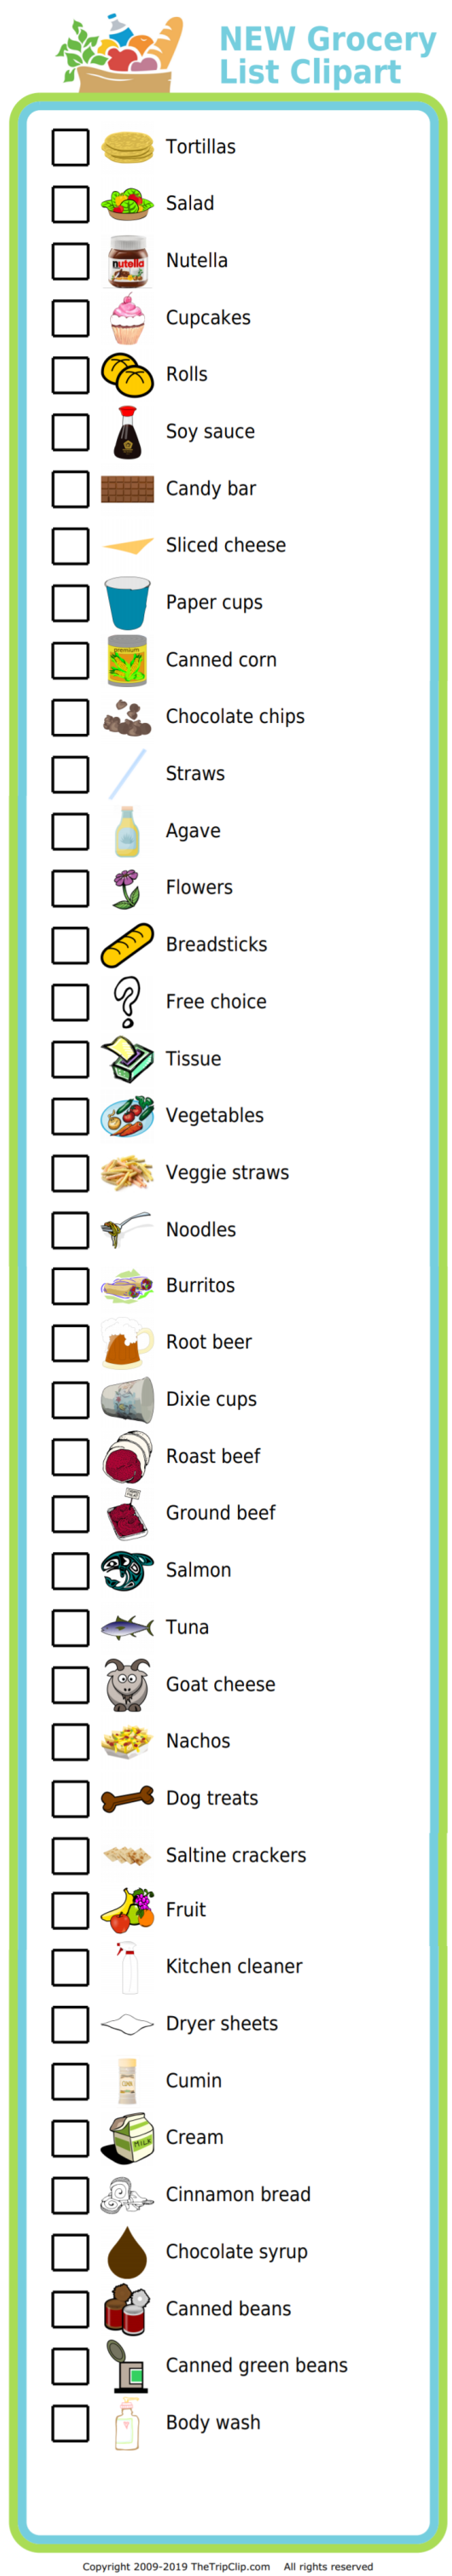 NEW Grocery Shopping Clipart | The Trip Clip Blog